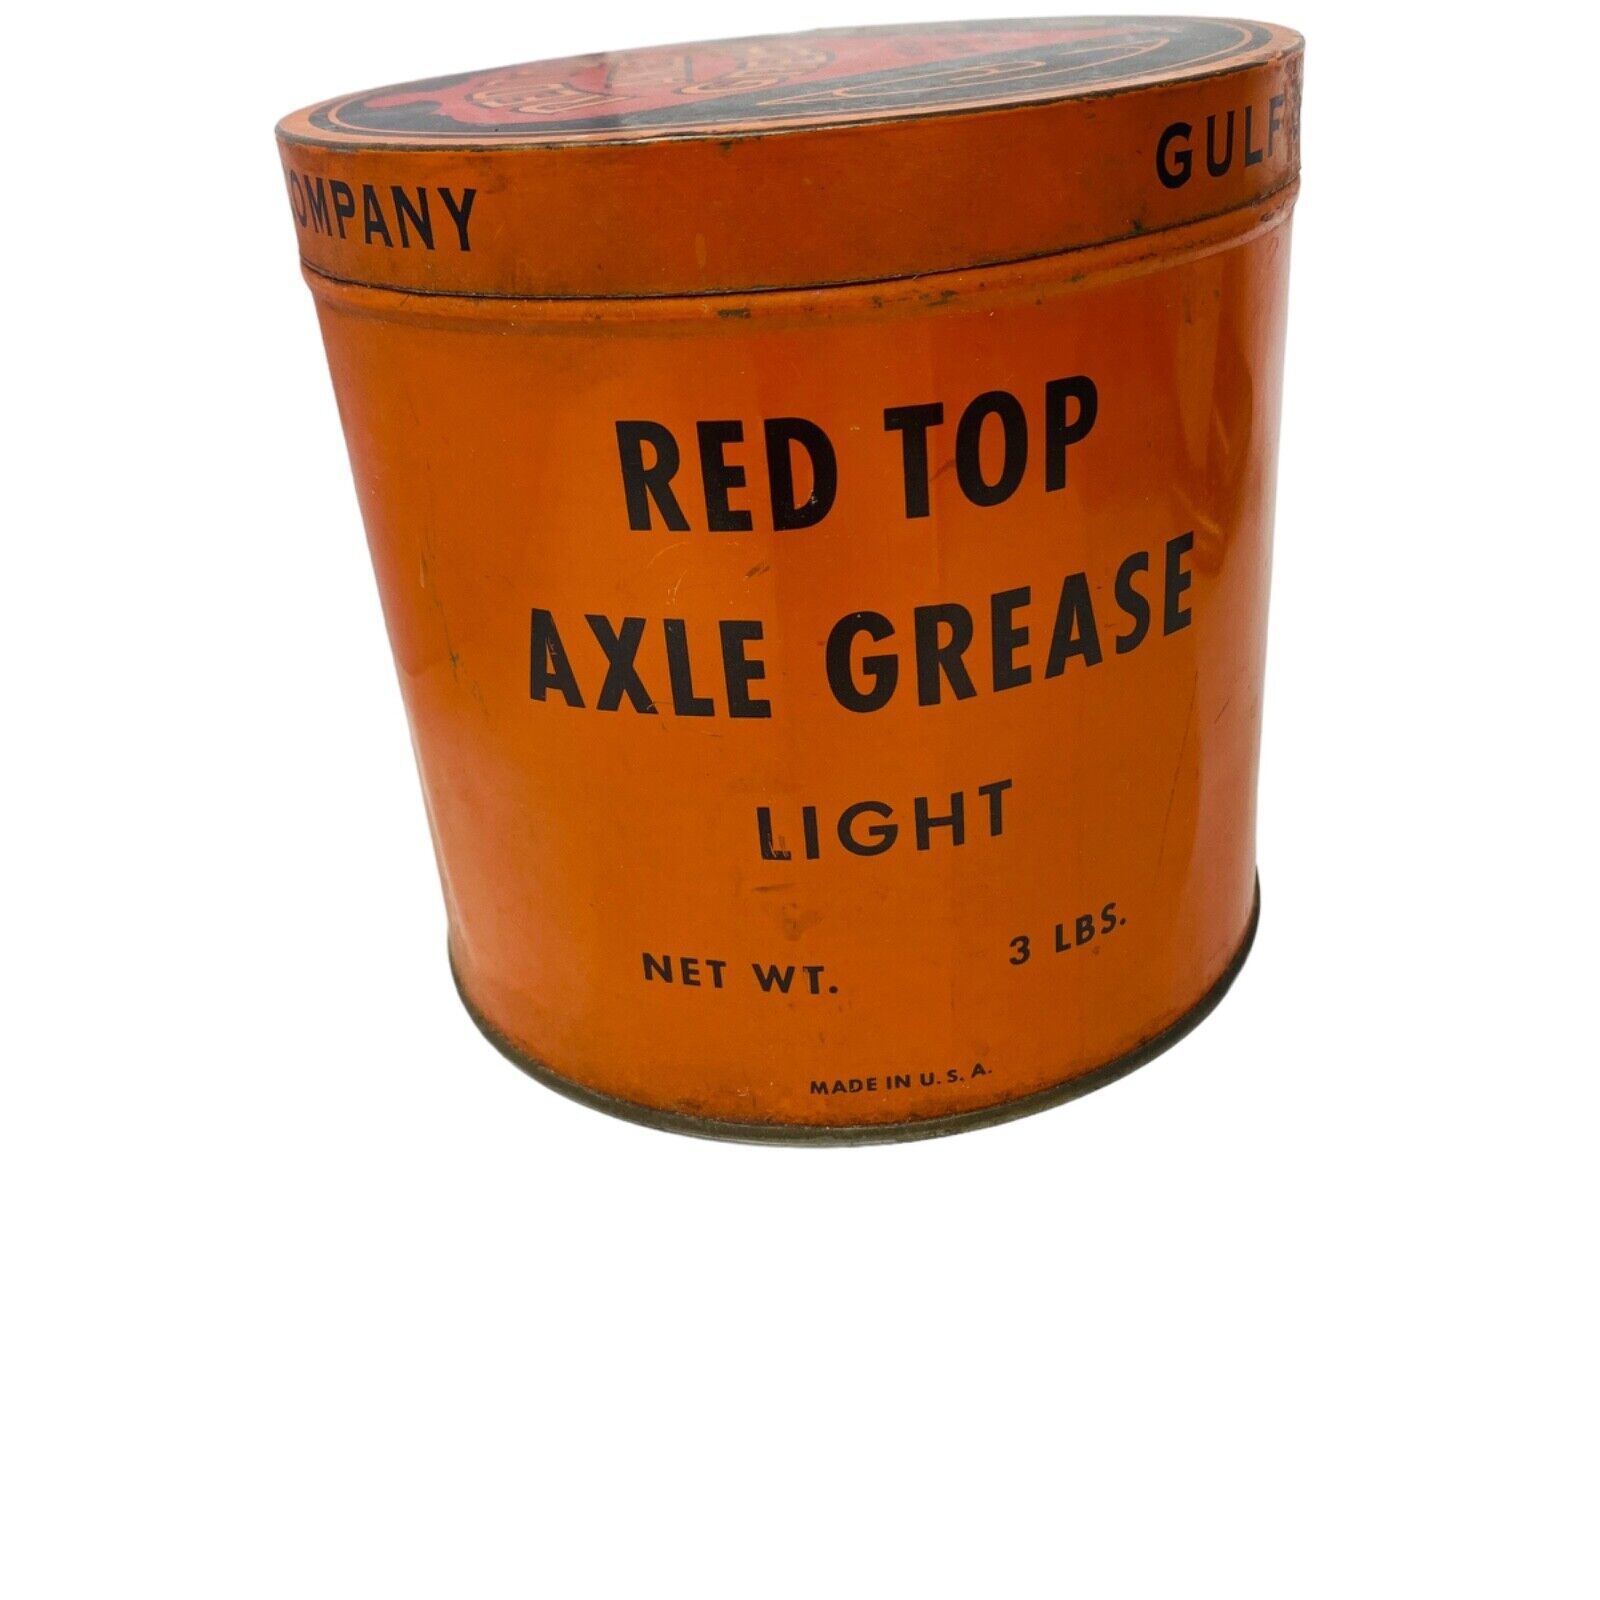 VINTAGE GULF REFINING CO RED TOP AXLE GREASE LIGHT 3 LB CAN  GREAT CONDITION - $111.38